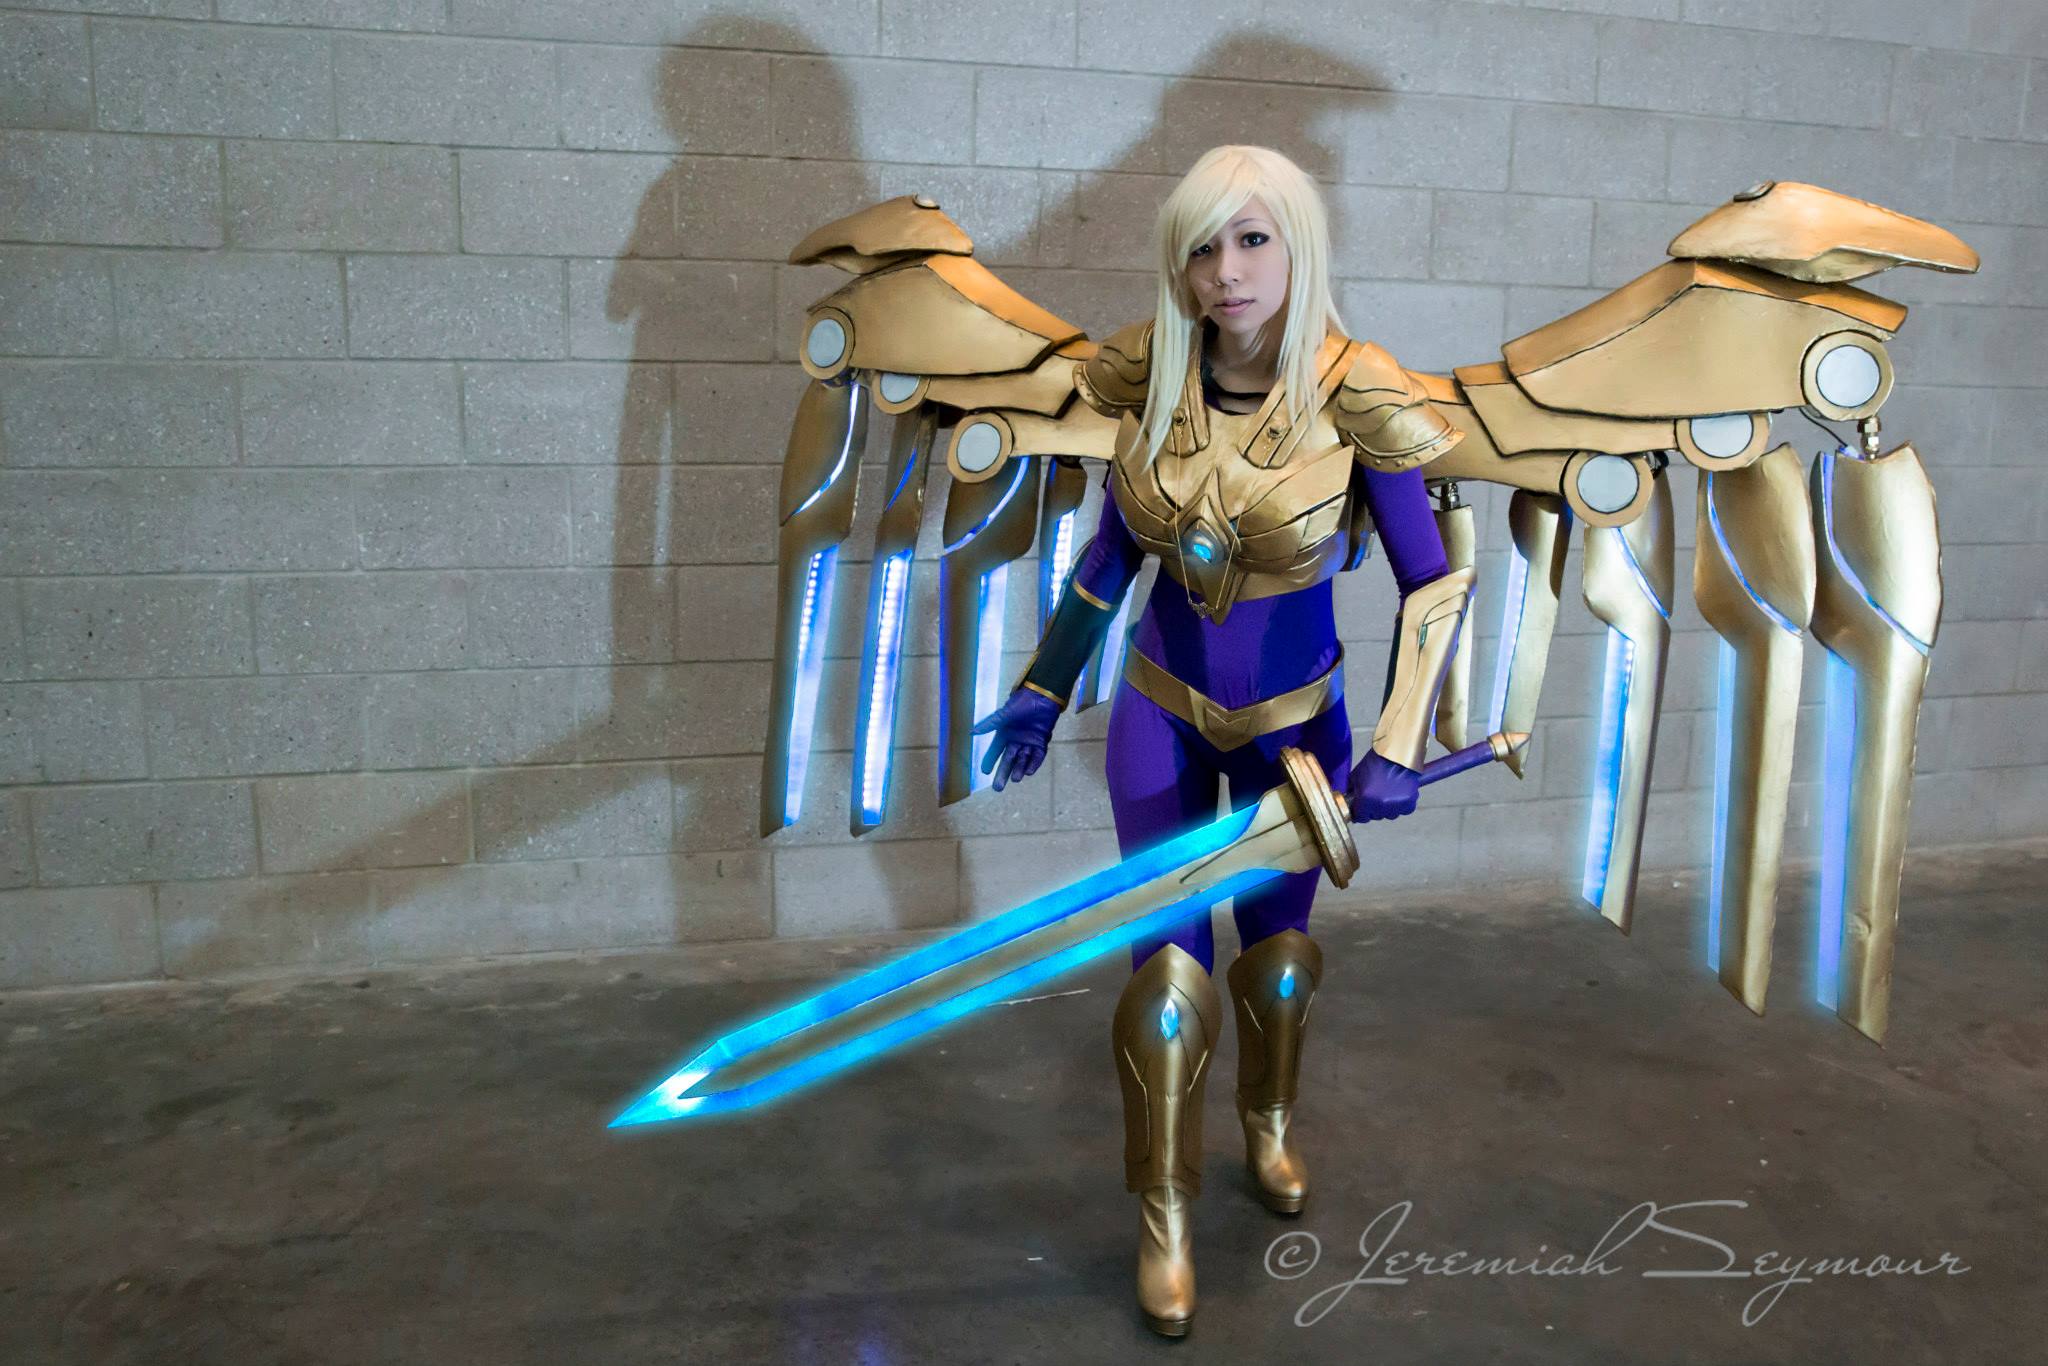 Aether wing kayle cosplay